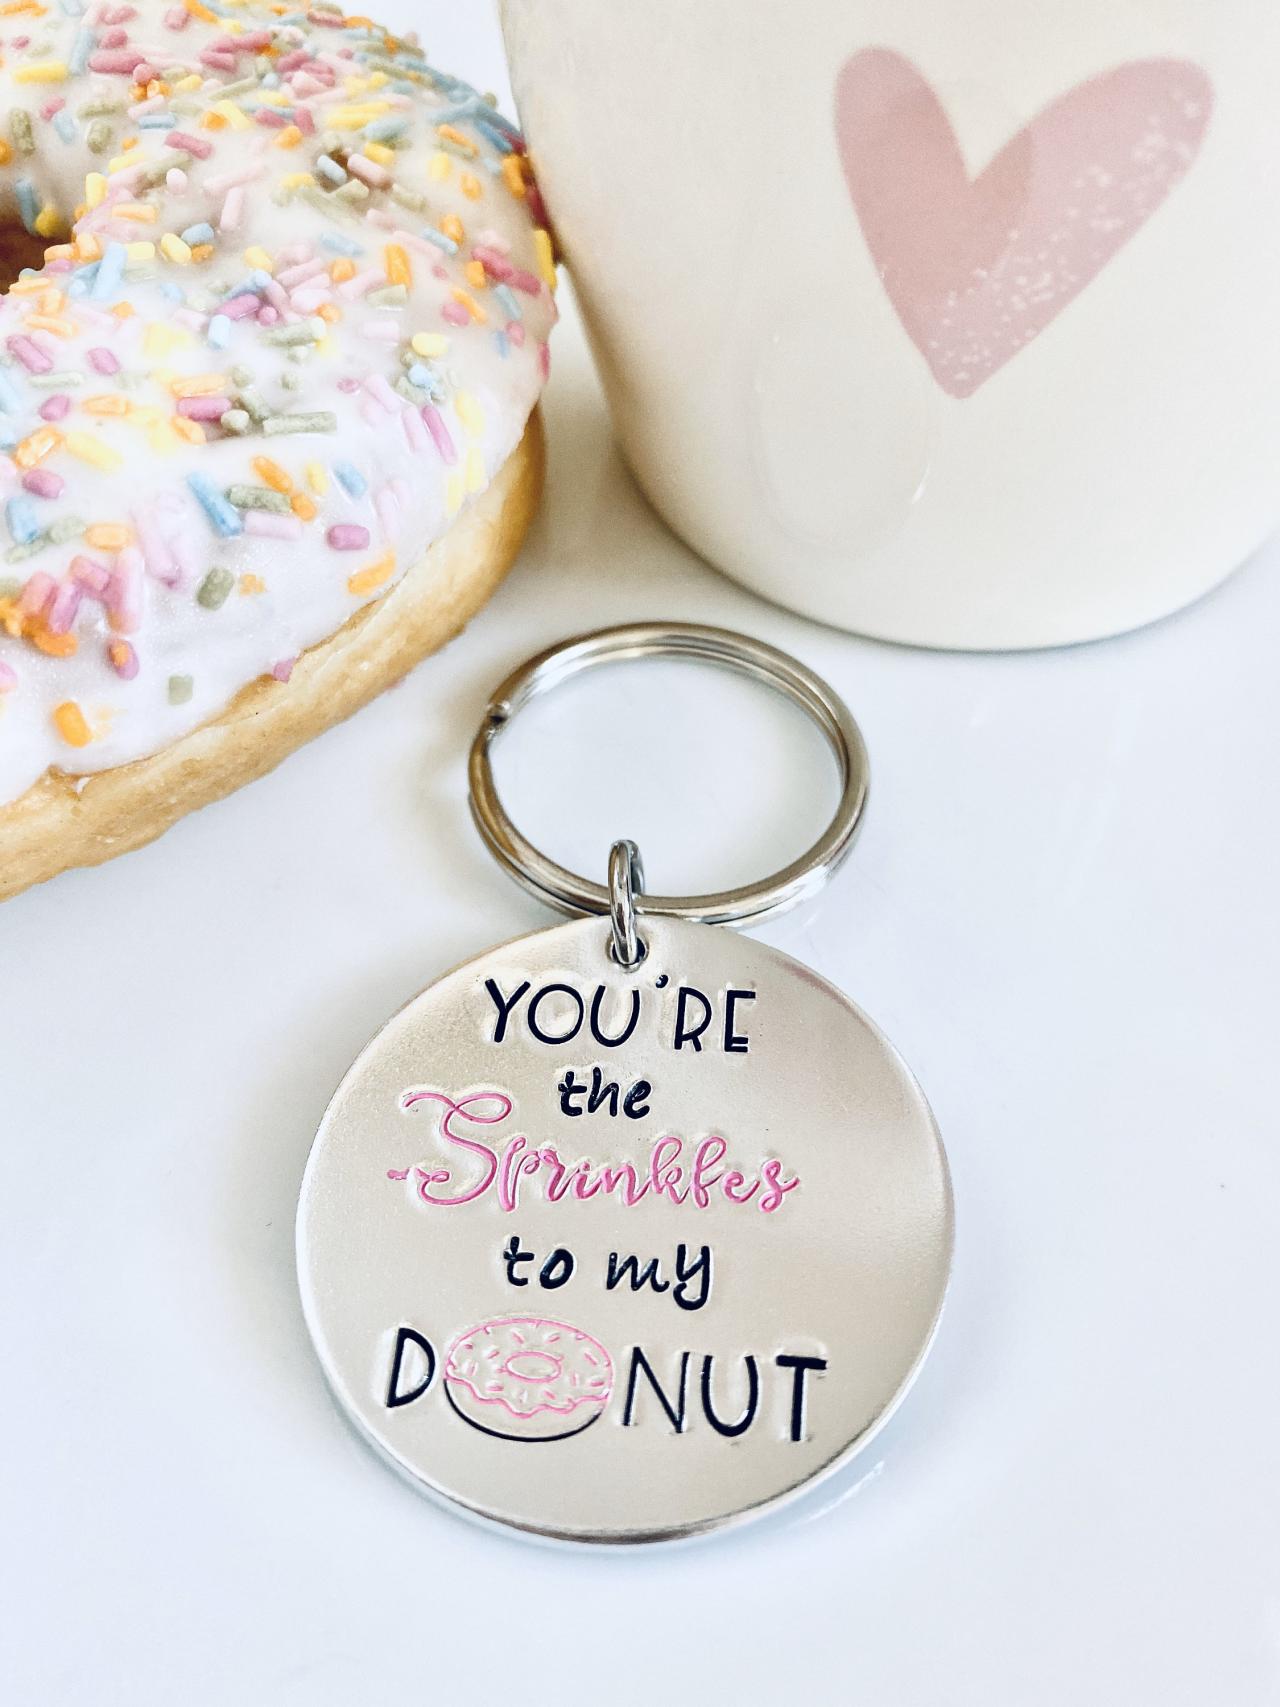 Donut Keyring, Personalised Gift, Friend Gift, Mate Gift, Gift For Her, Mate Gift, Hand Stamped Keychain, Unique Gift, Colleauge